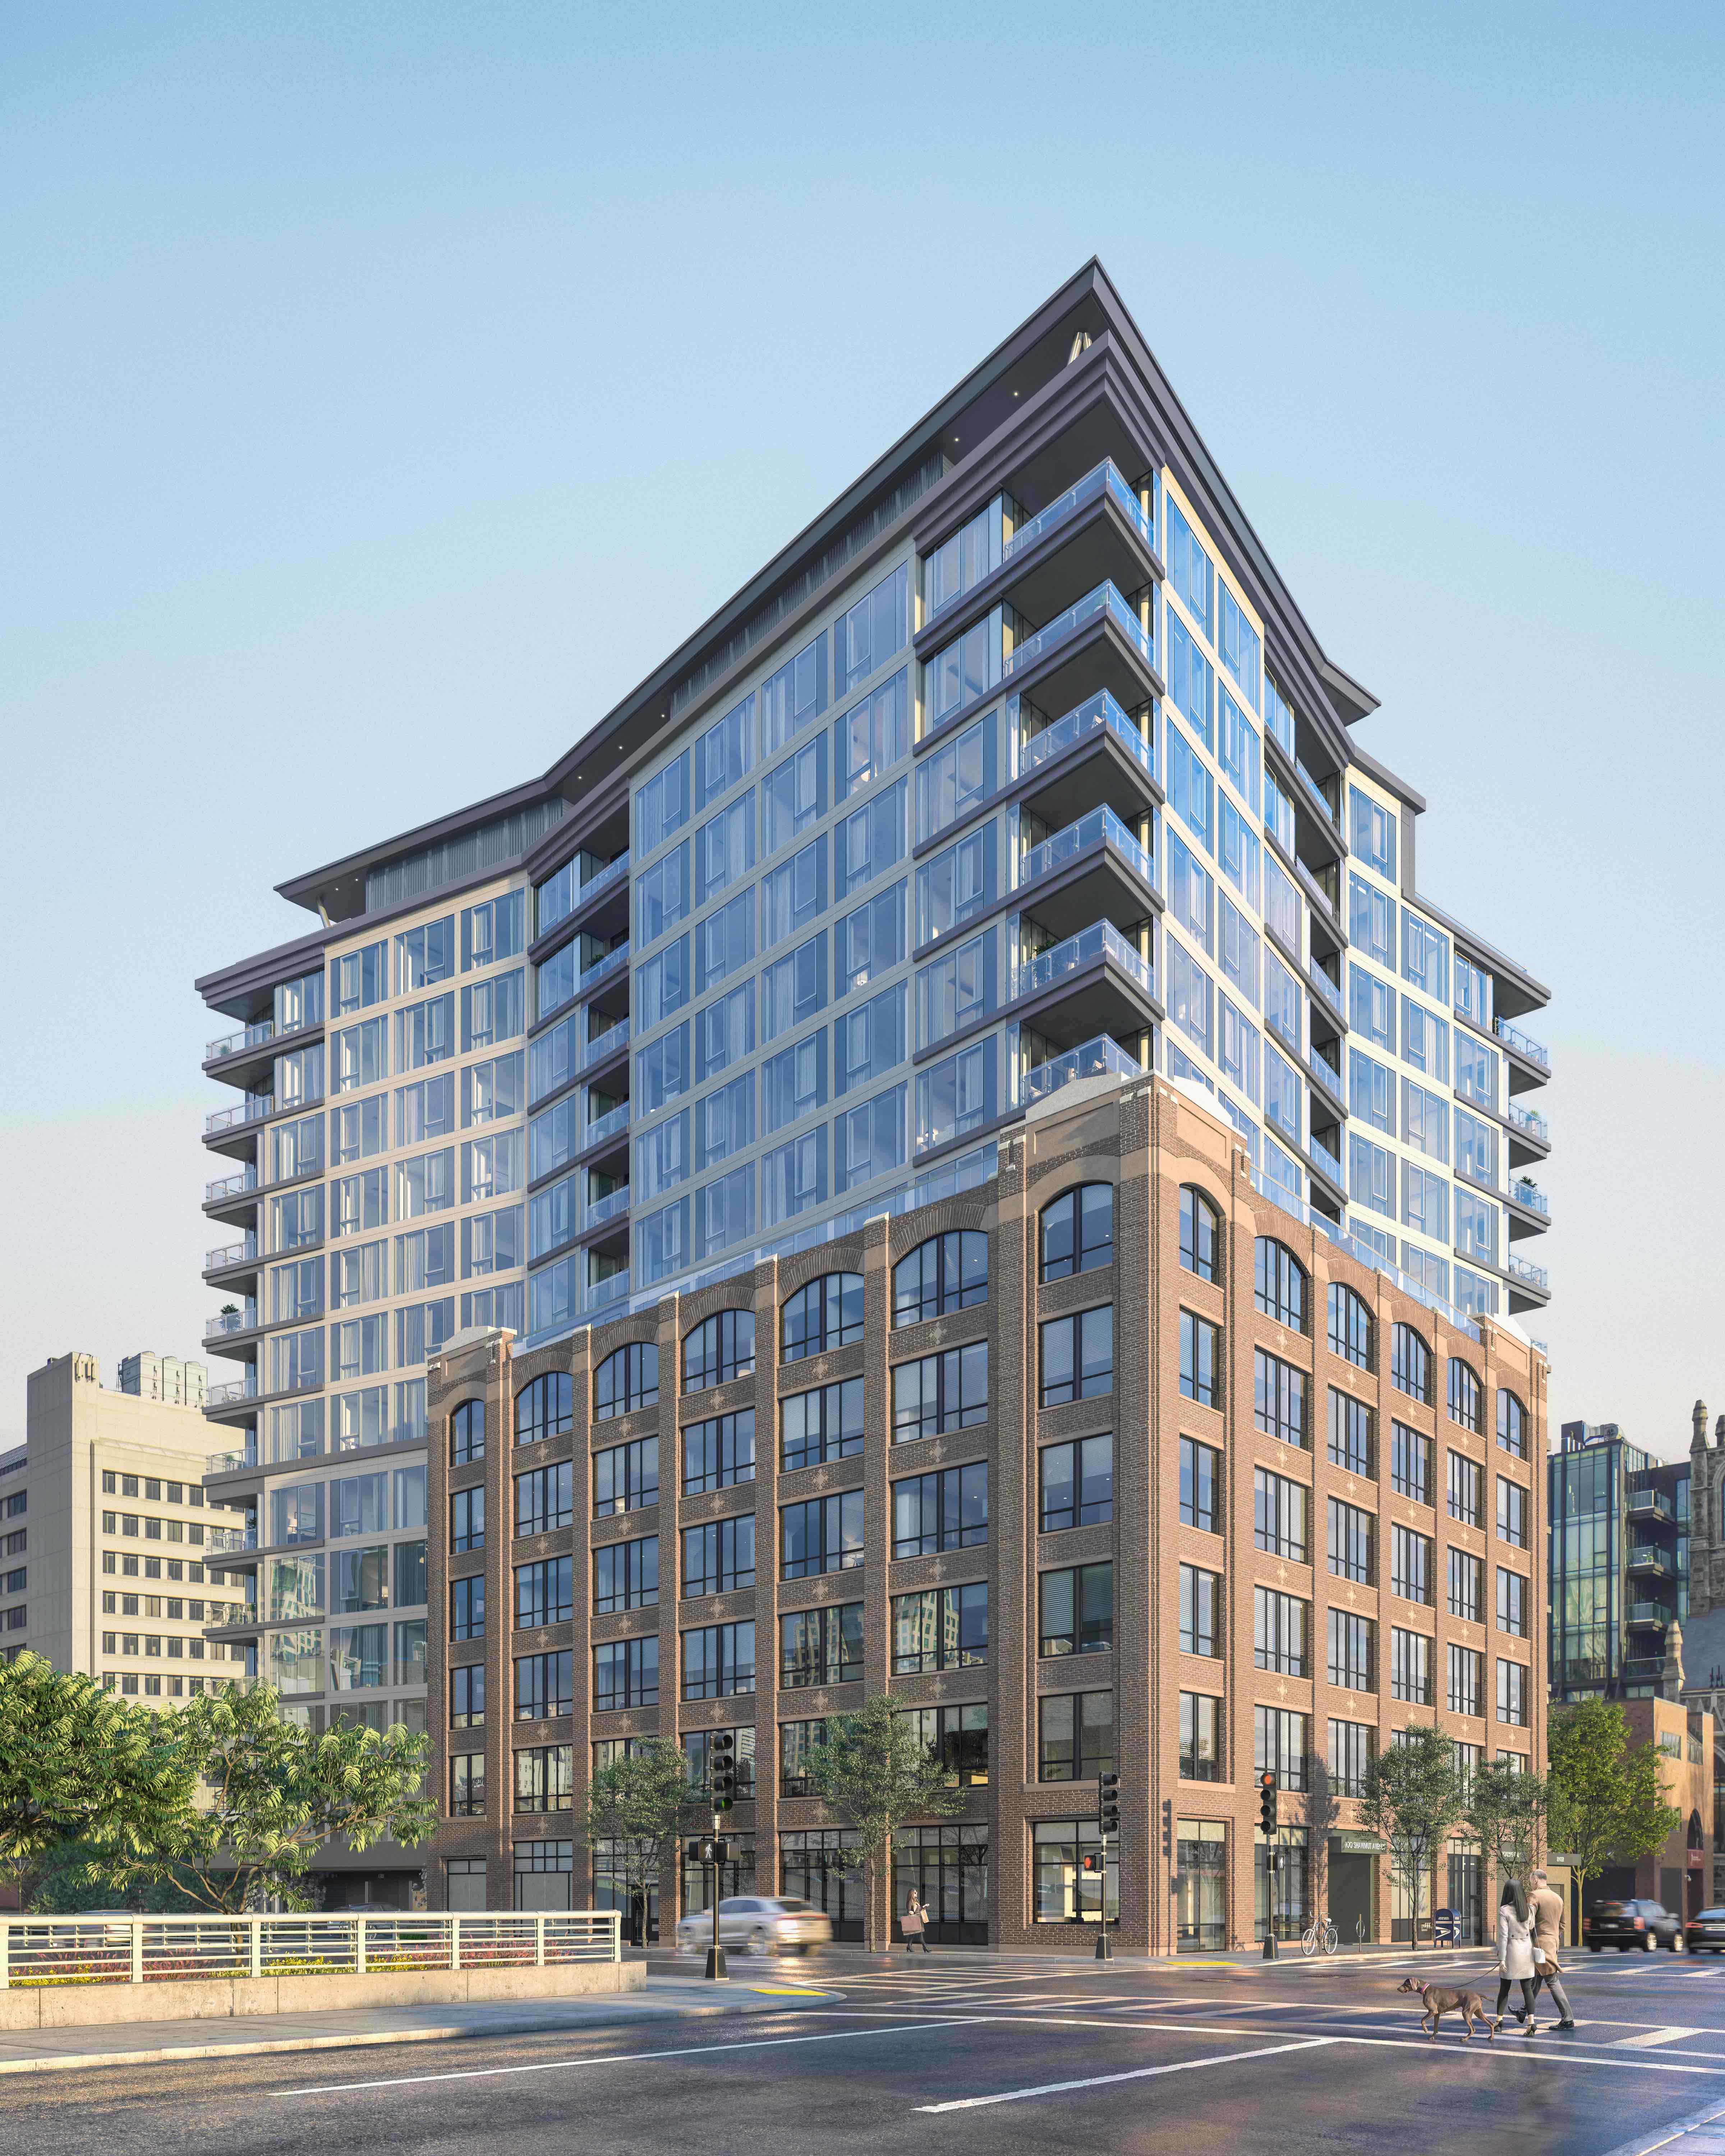 Through combinations of new construction and adaptive reuse, TAT is enlivening communities while preserving historic character. Pictured: 100 Shawmut in Boston (Image Credit: NeoScape)